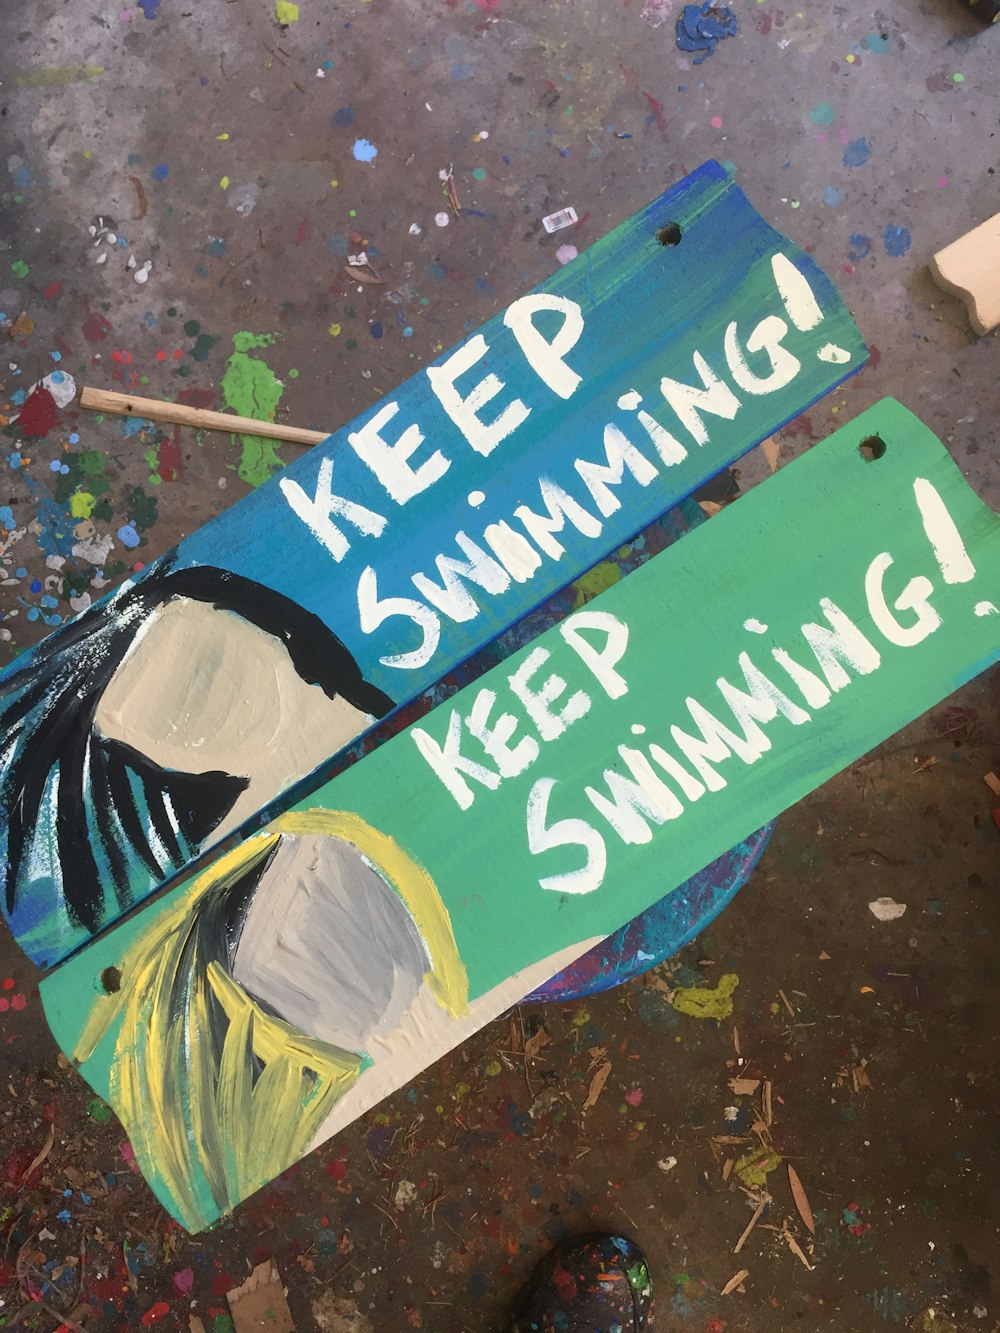 Colorful pieces of wood painted with blank faces that say "Keep swimming!"